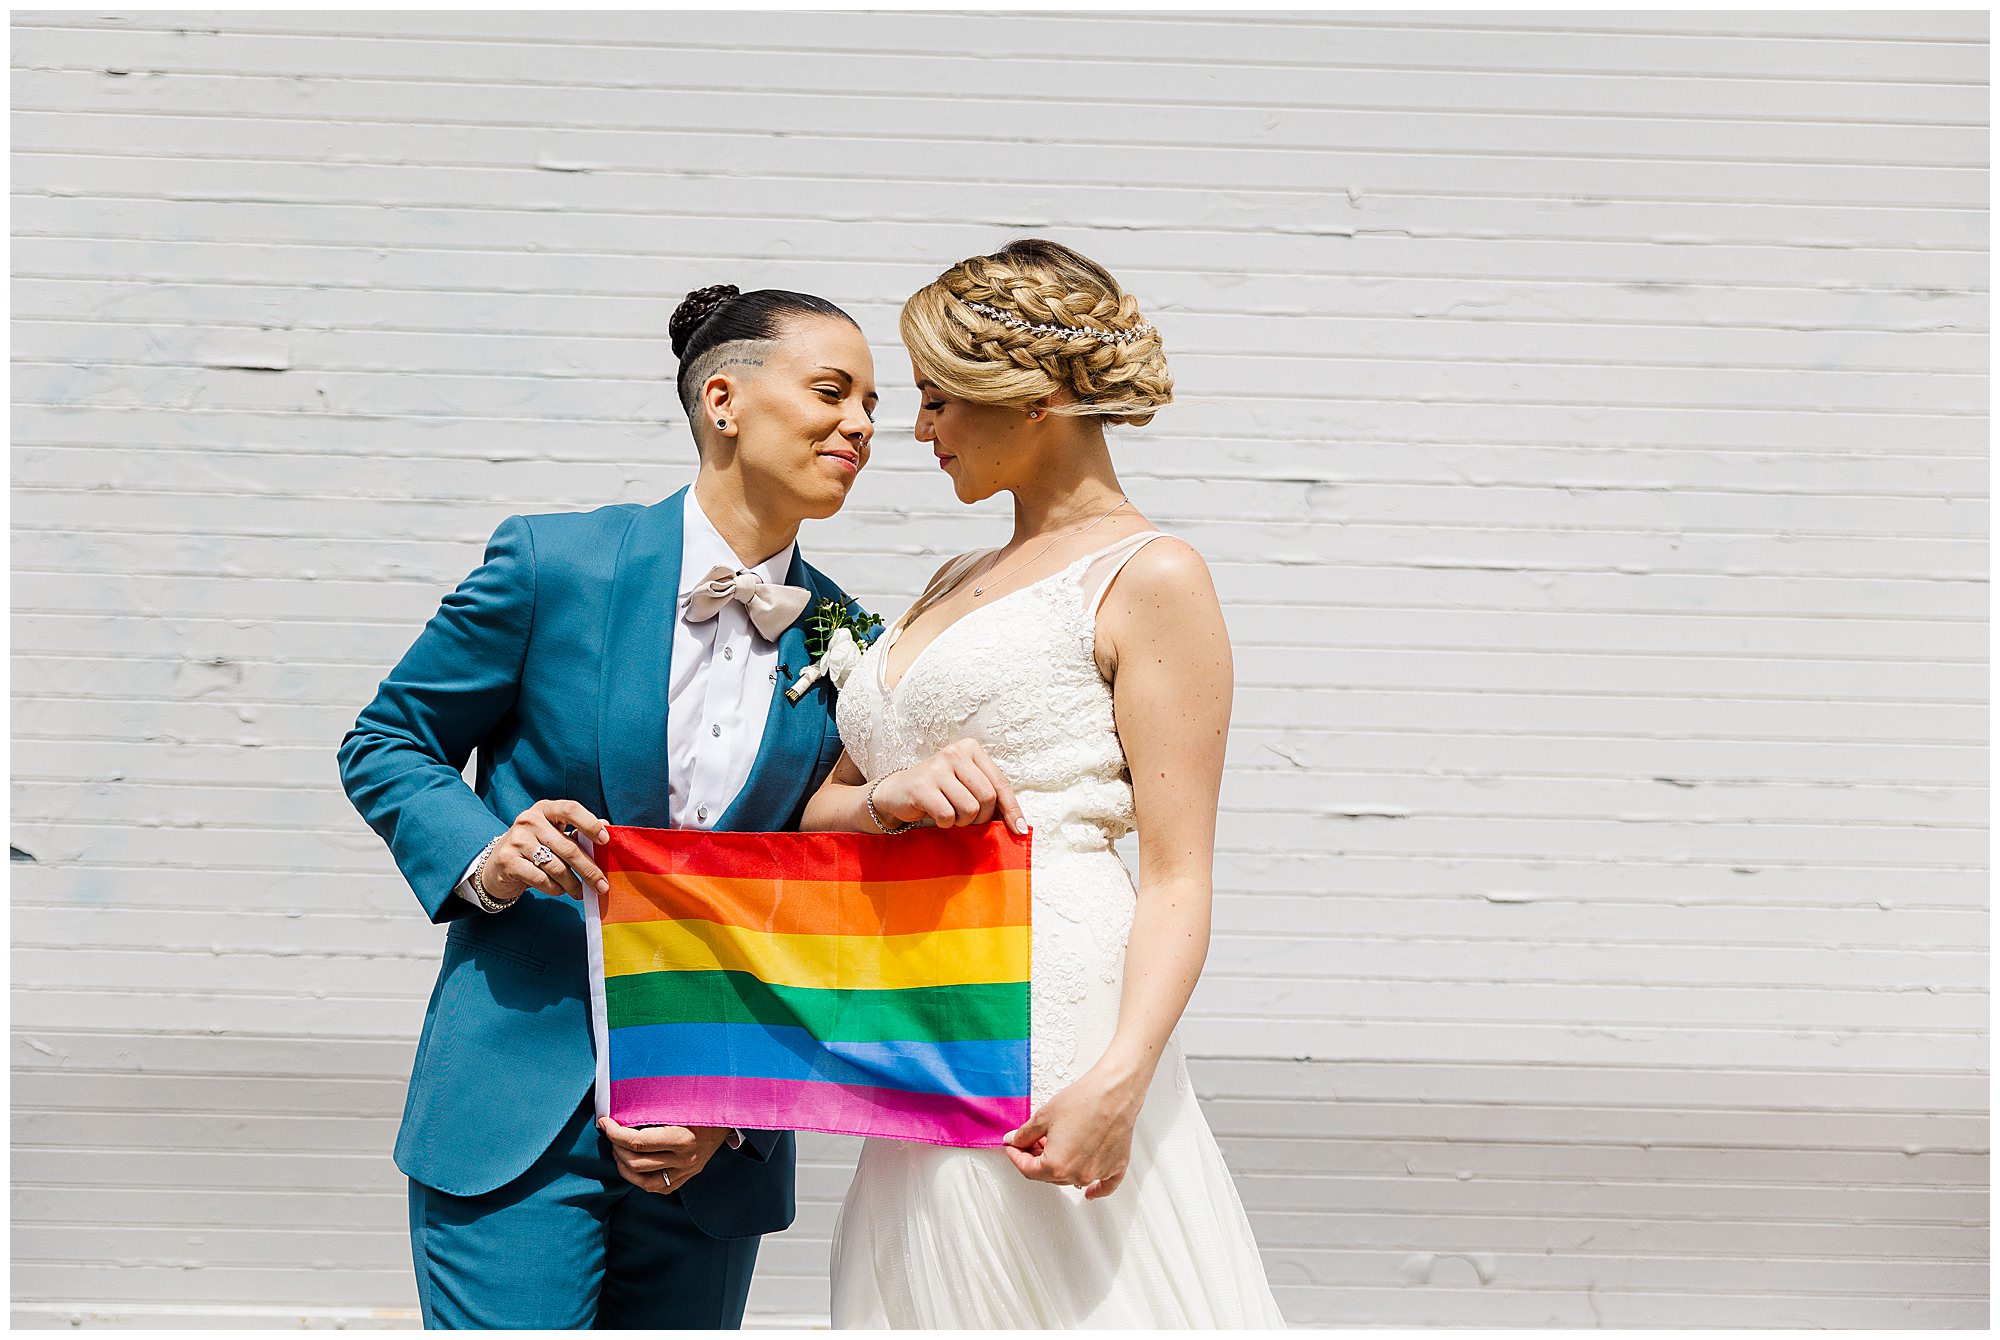 Pride Accessories For Your Wedding Day